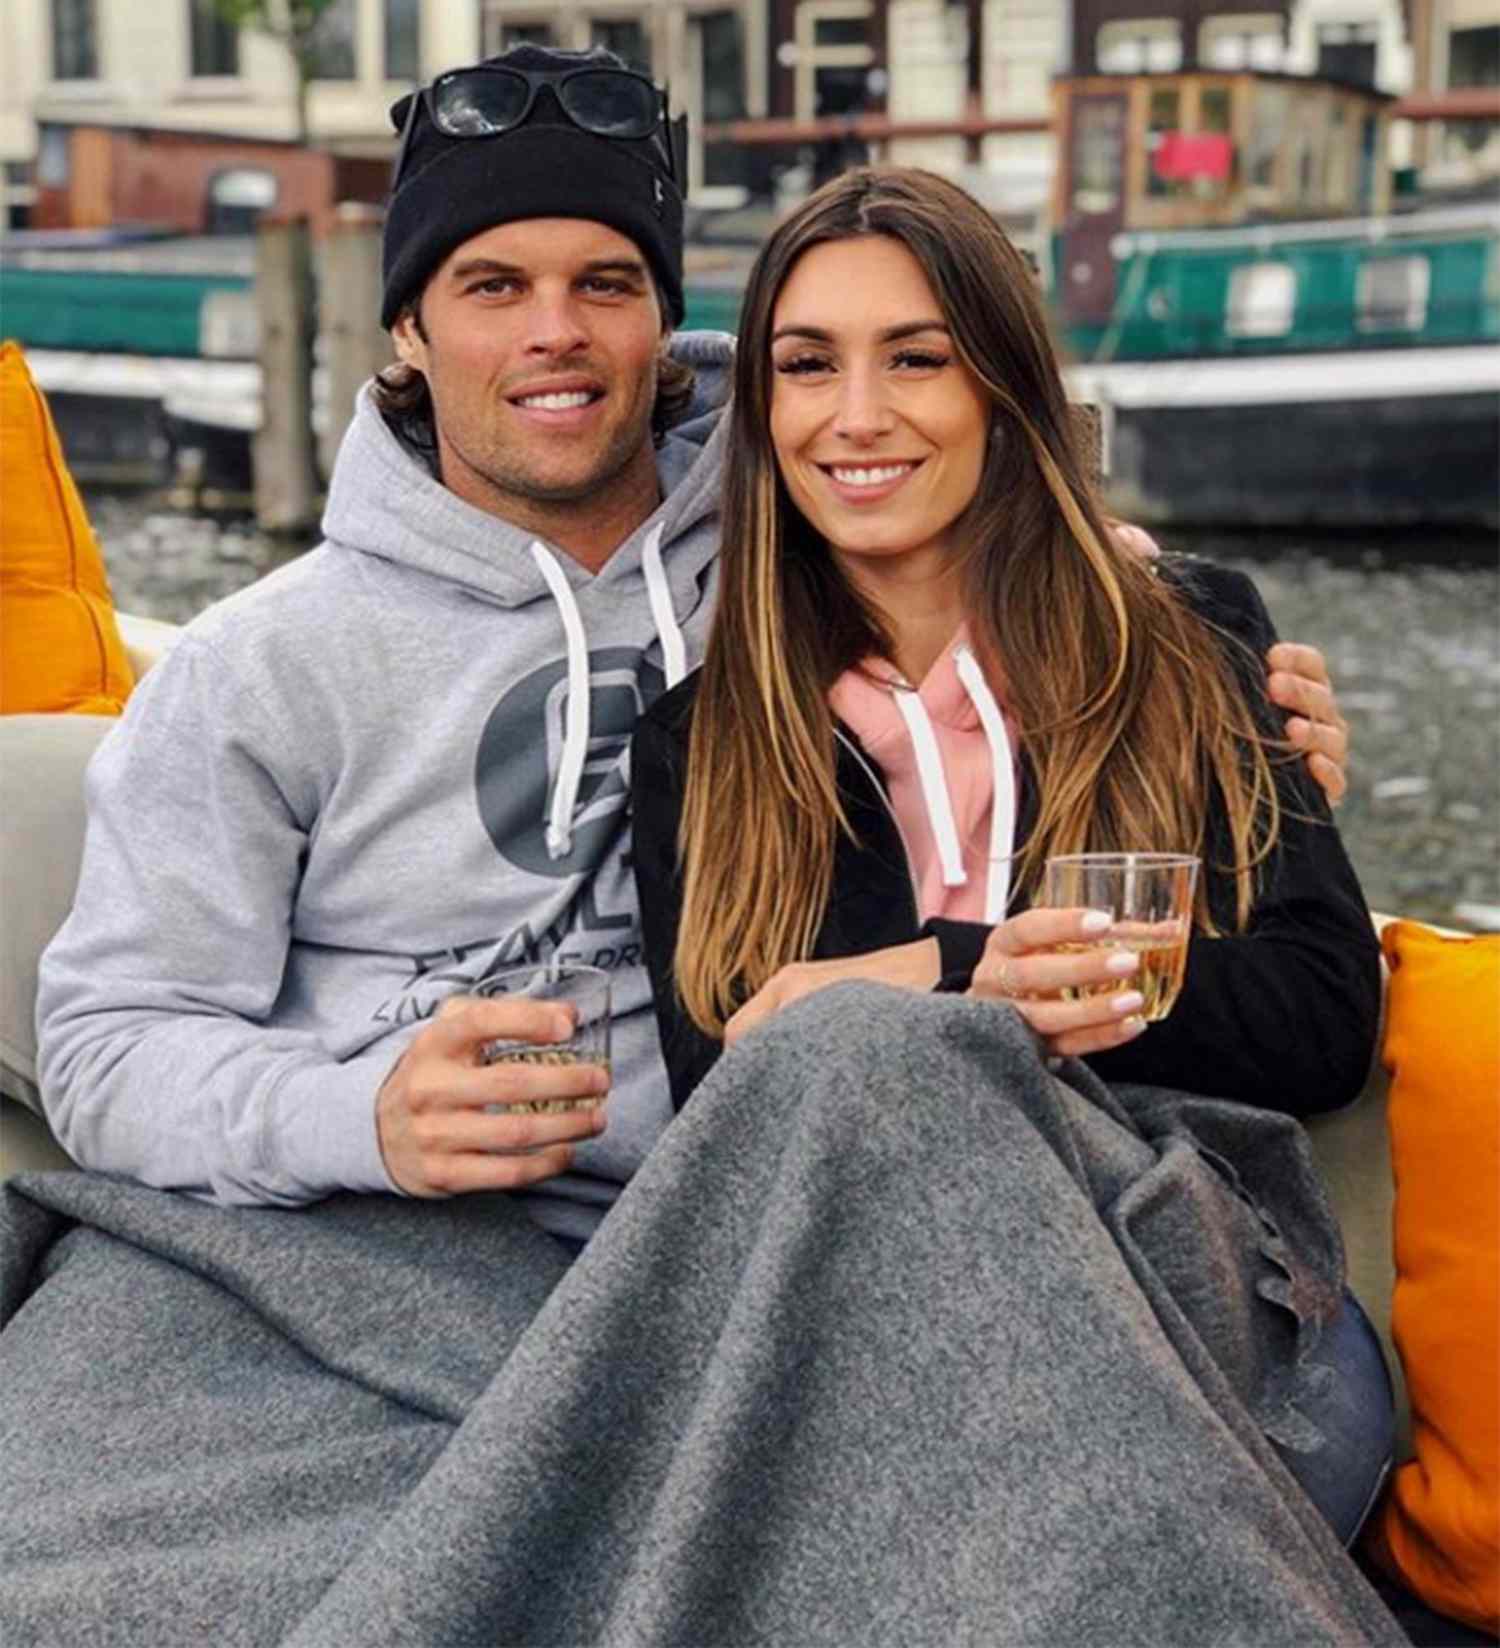 Of still the couples are any married? bachelor ‘The Bachelor’